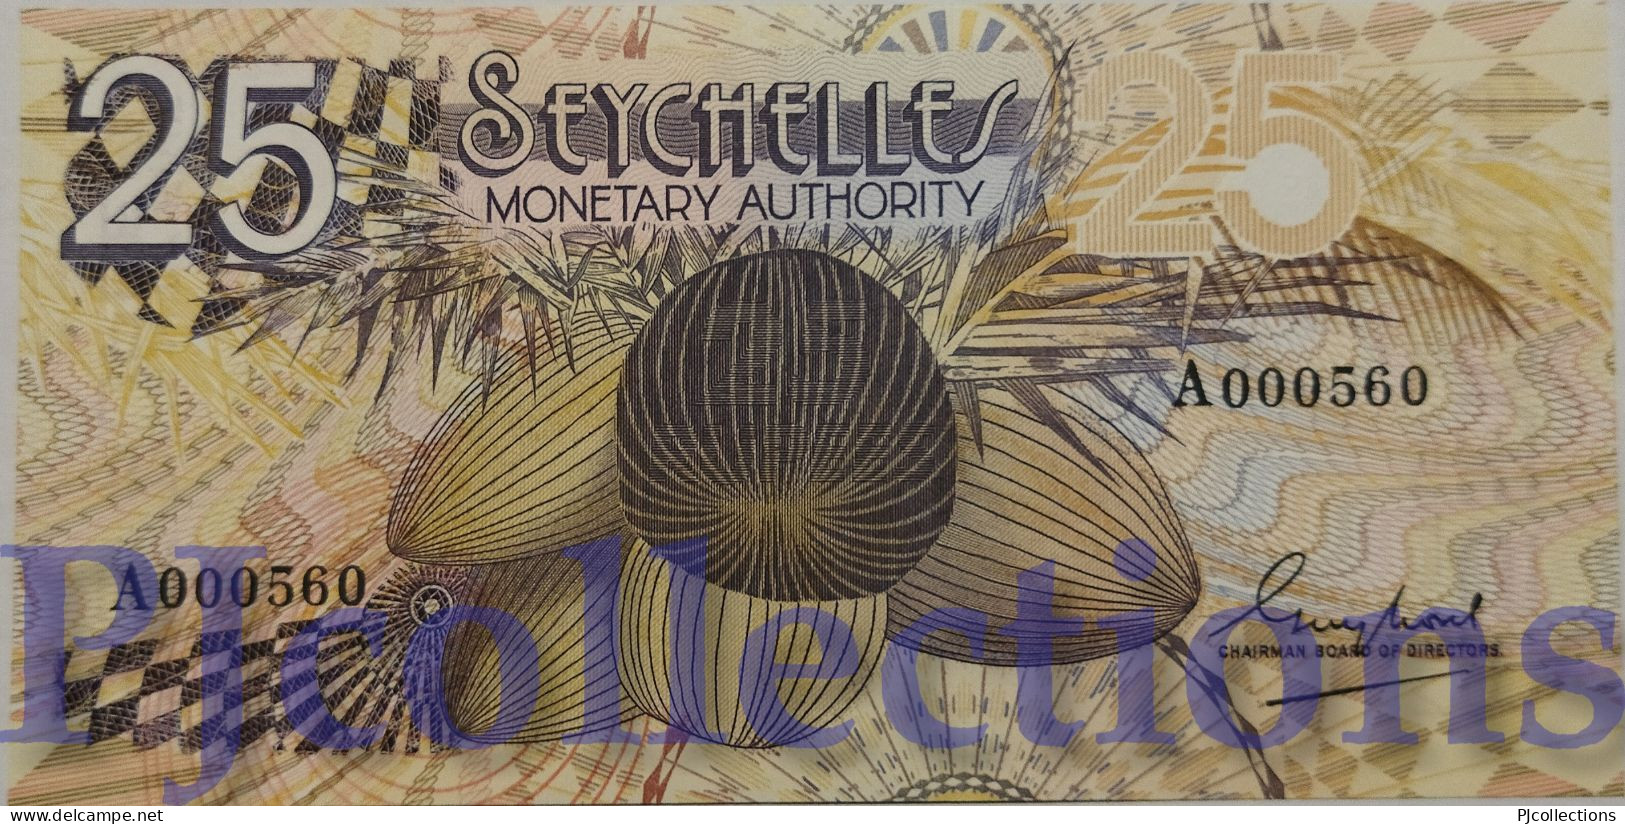 SEYCHELLES 25 RUPEES 1979 PICK 24a UNC LOW SERIAL NUMBER "A 000560" - Seychelles